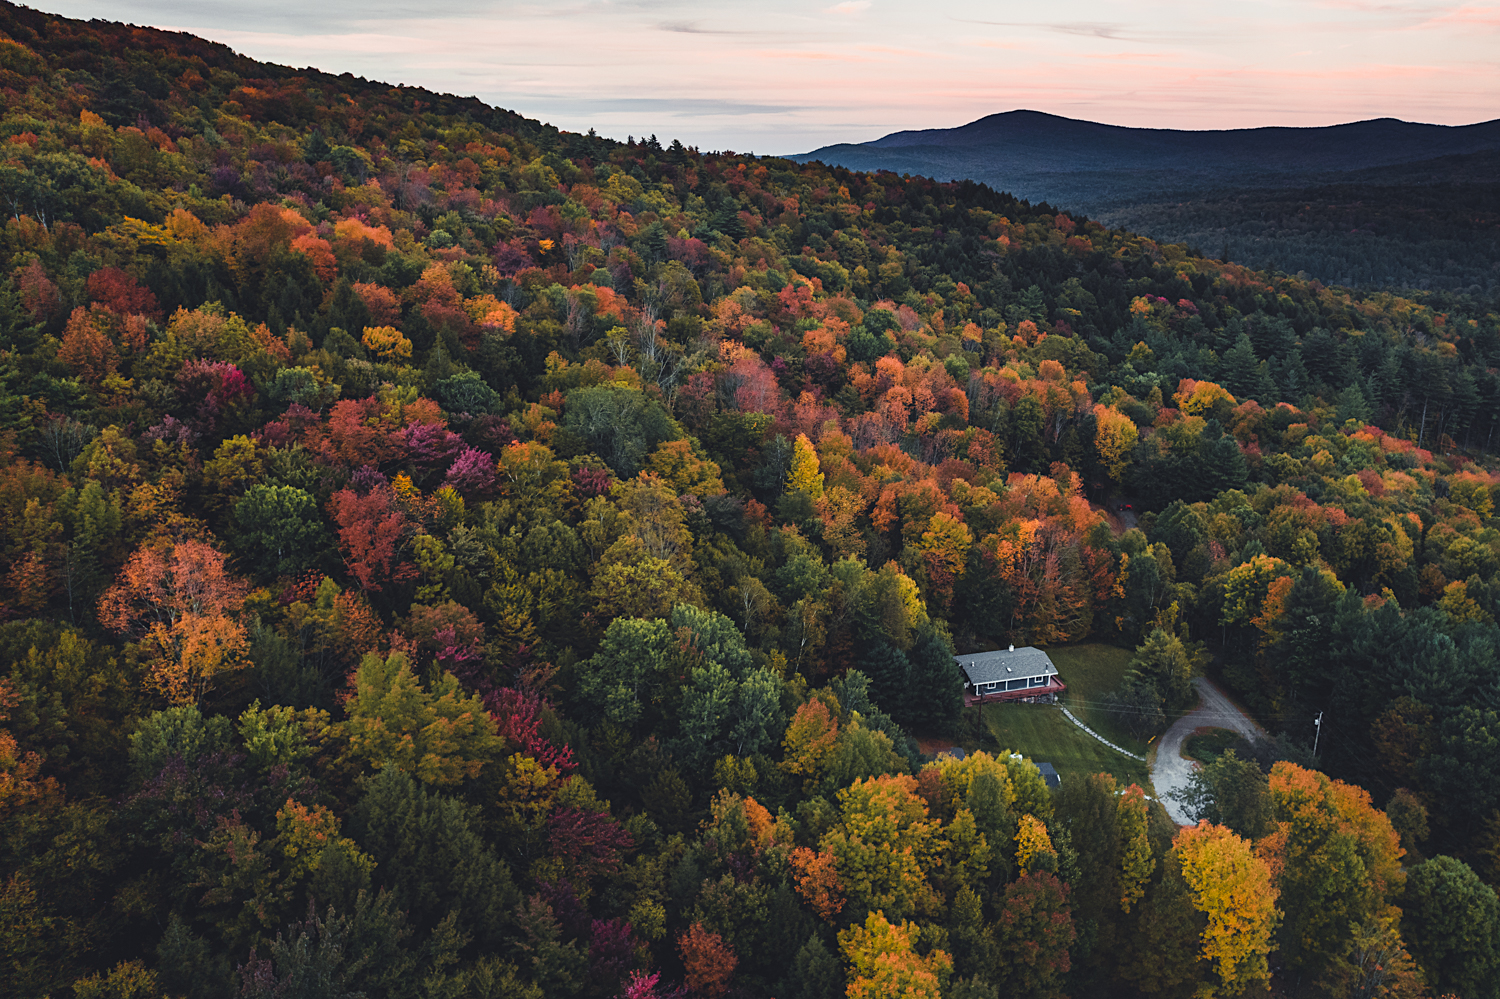 House nestled at the bottom of a hill in Vermont during fall with beautiful leaves changing colors